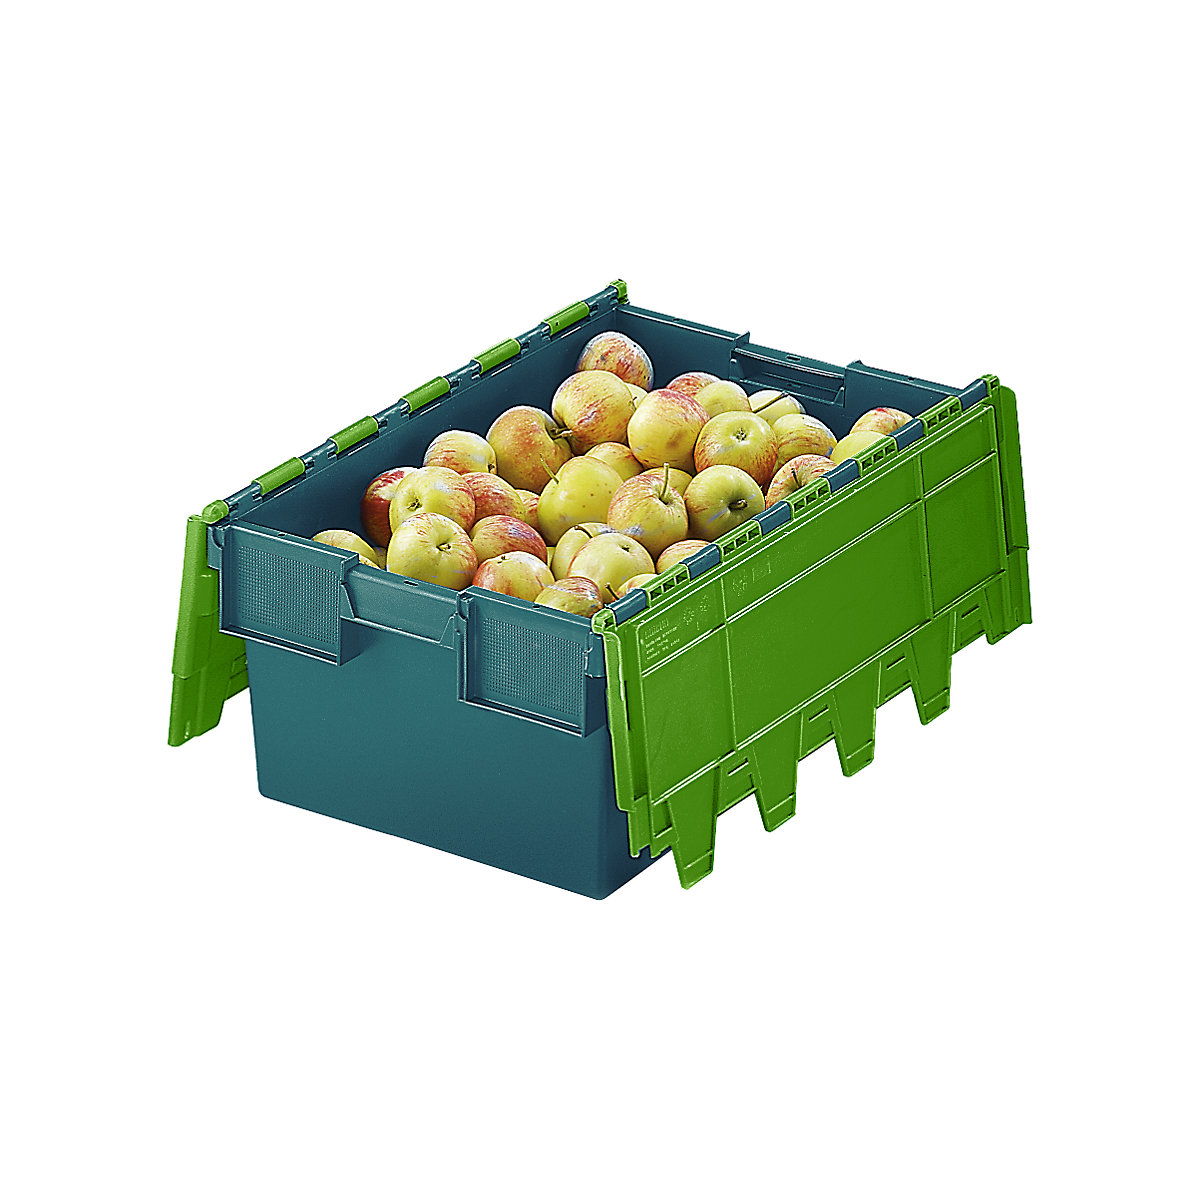 Reusable stacking containers with folding lids, capacity 40 litres, LxWxH 600 x 400 x 250 mm, green, 10+ items